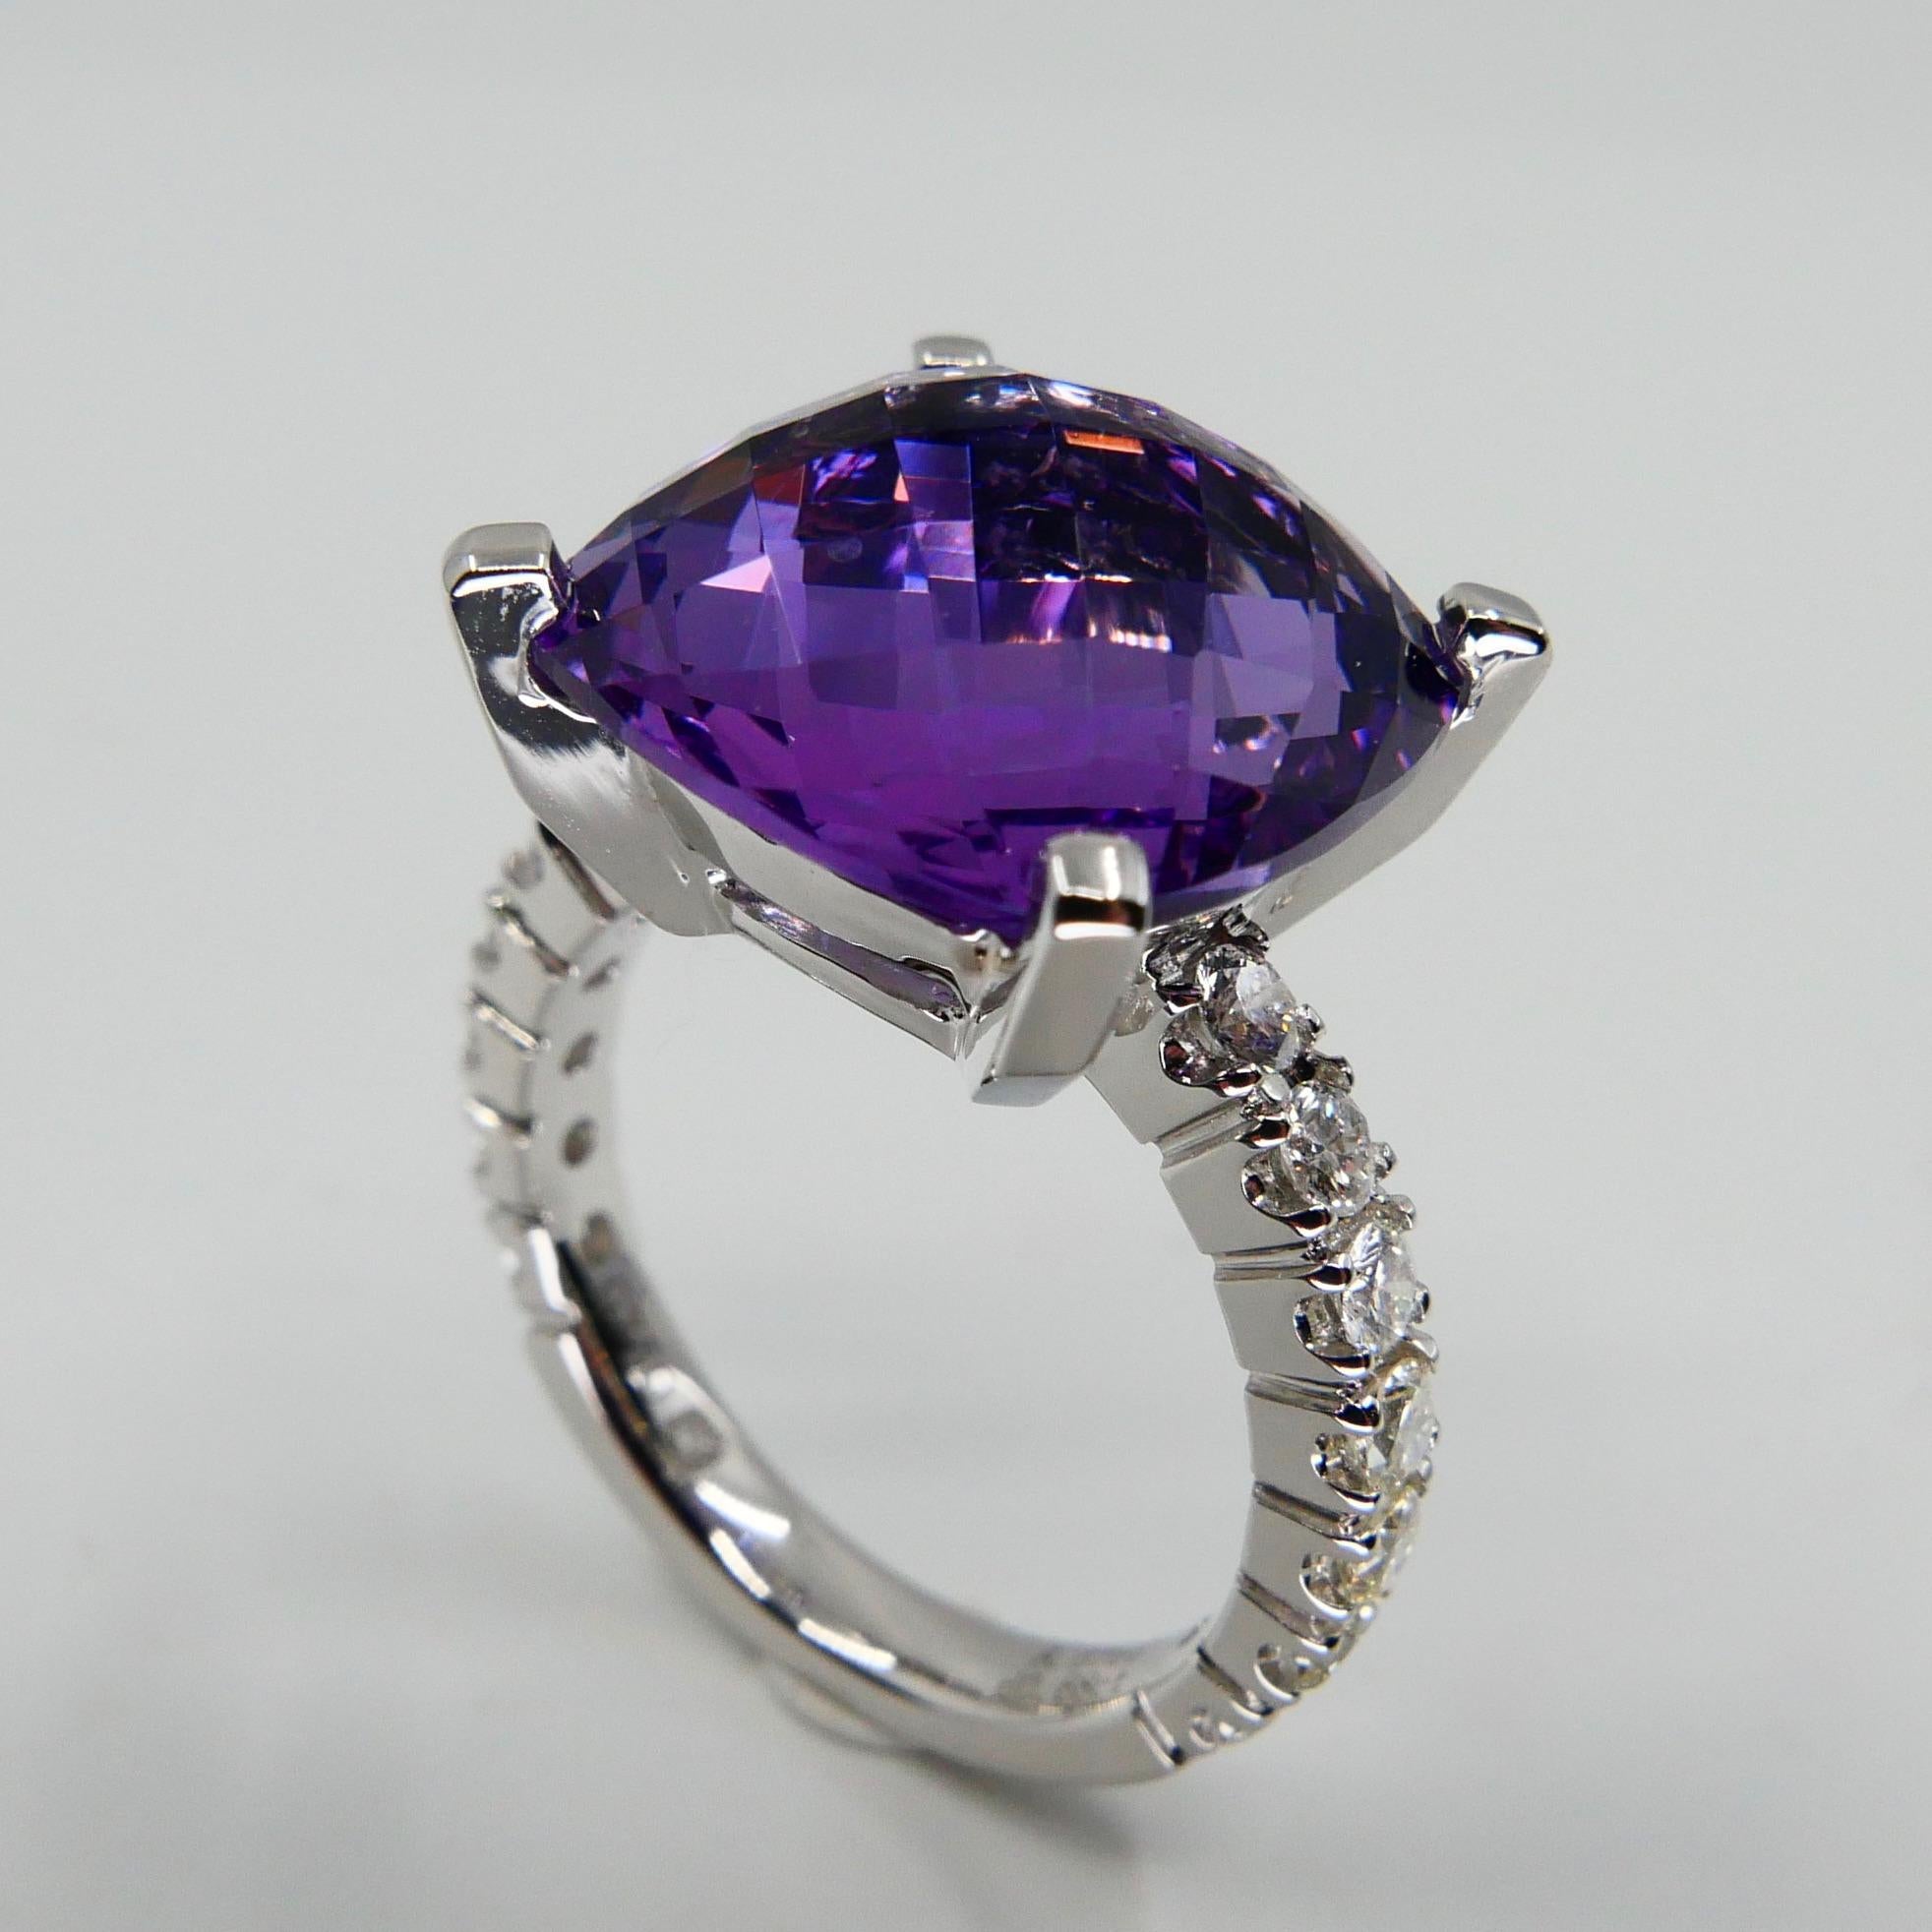 8.67 Carat Faceted Amethyst and Diamond Cocktail Ring, 18 Karat White Gold For Sale 2